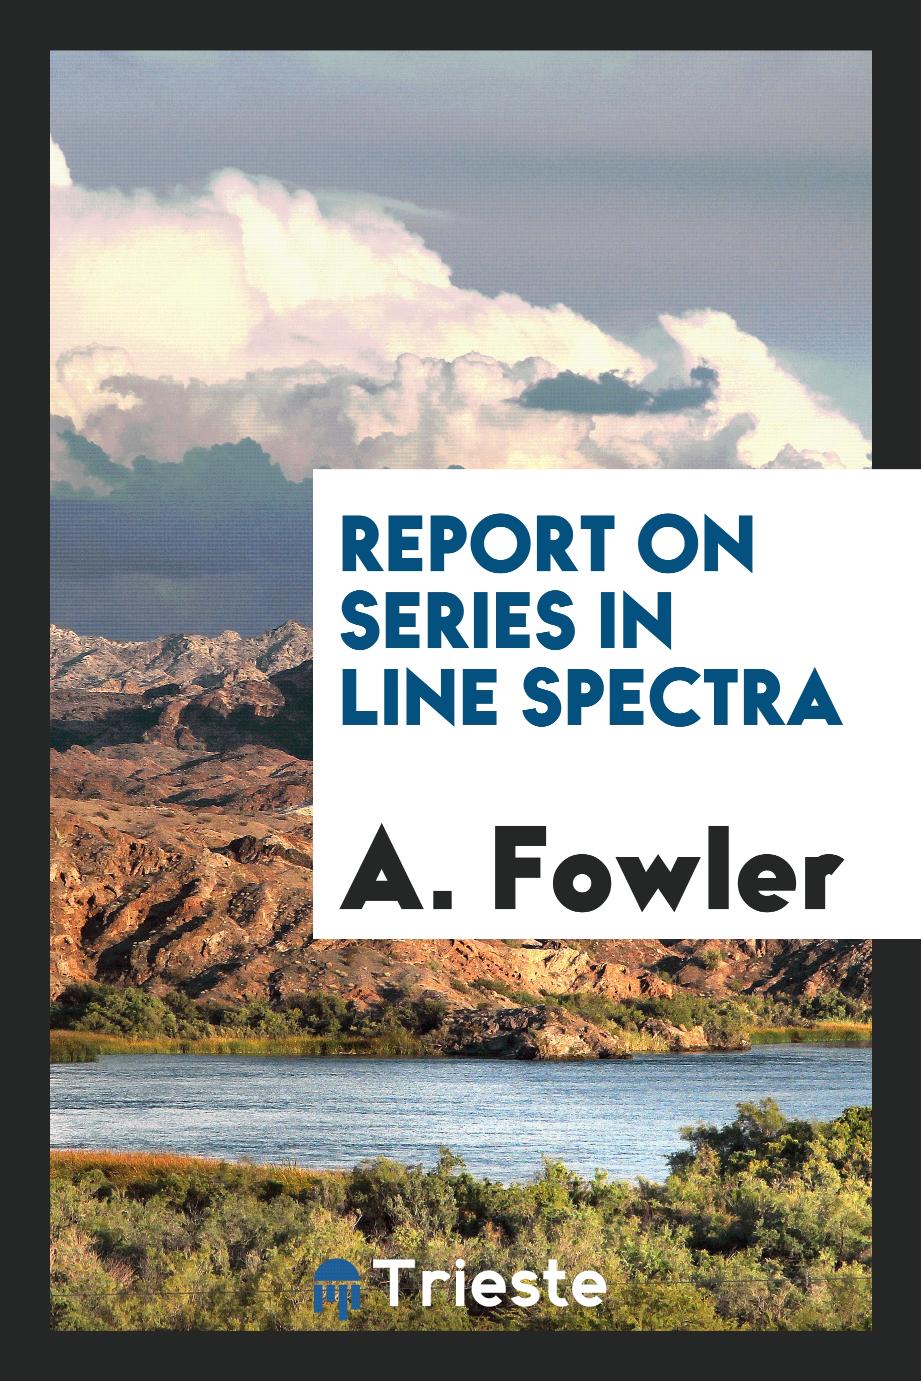 Report on series in line spectra